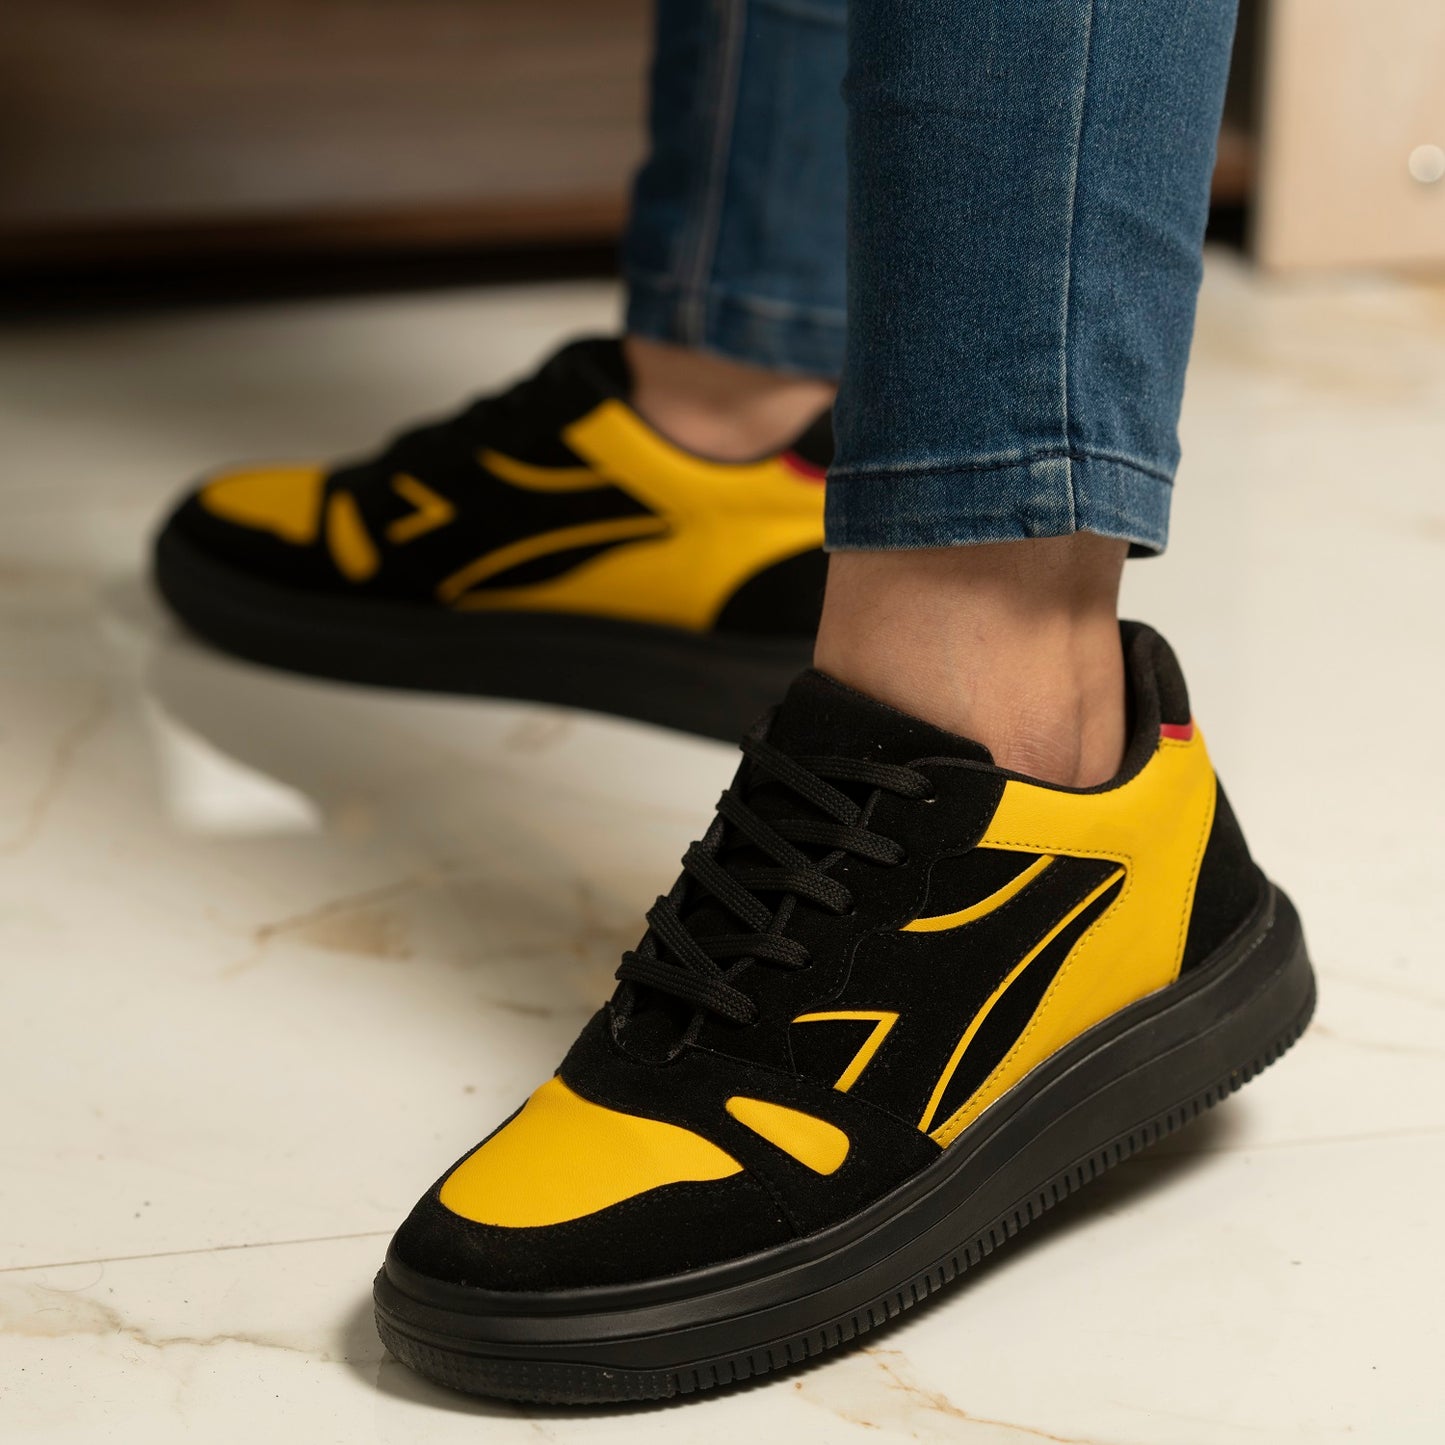 The Aurous Ignite Laceup Sneakers